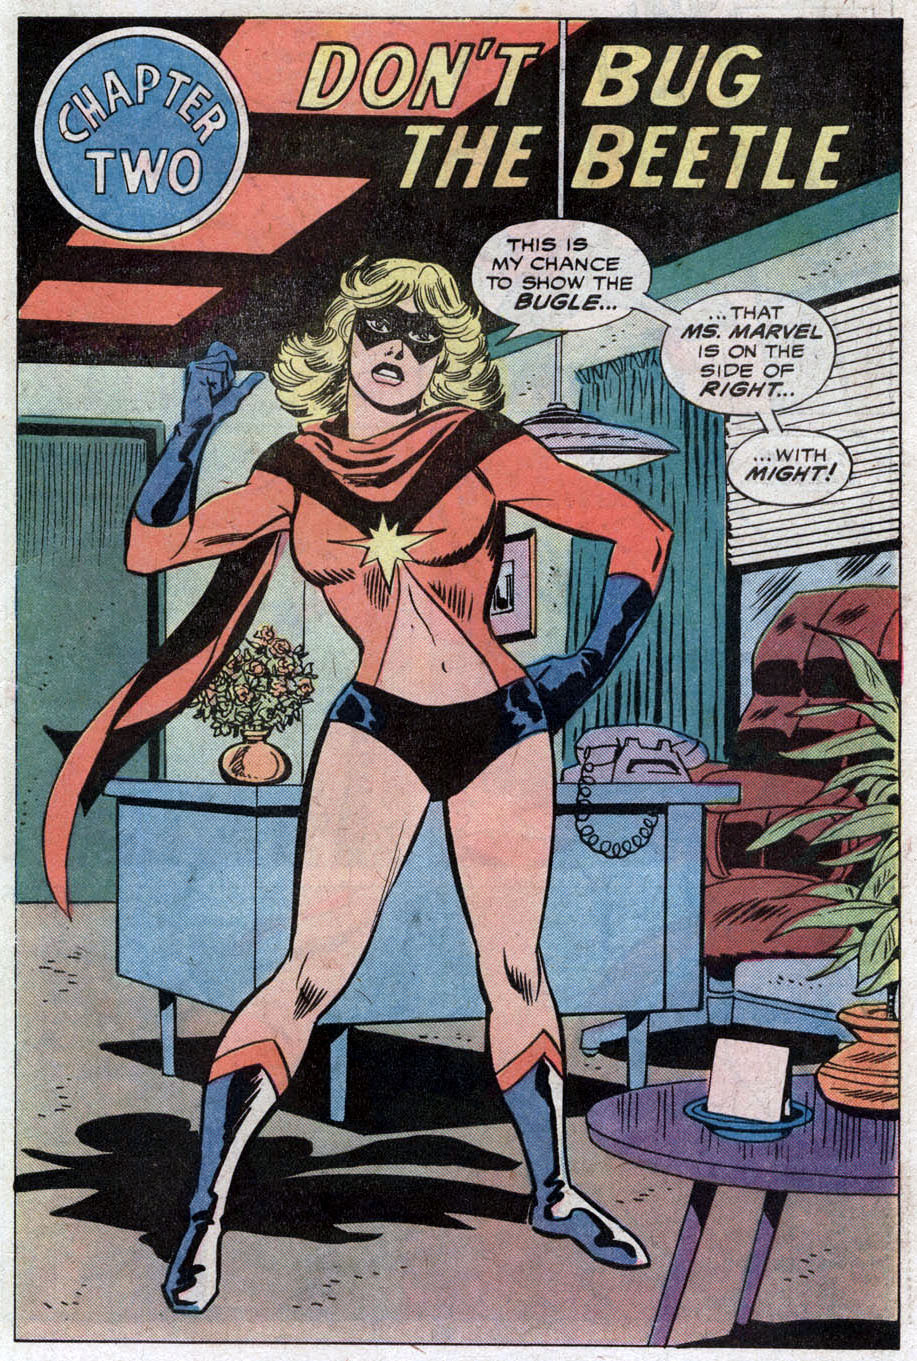 gameraboy:  Ms. Marvel is on the side of right… with might! Spidey Super Stories